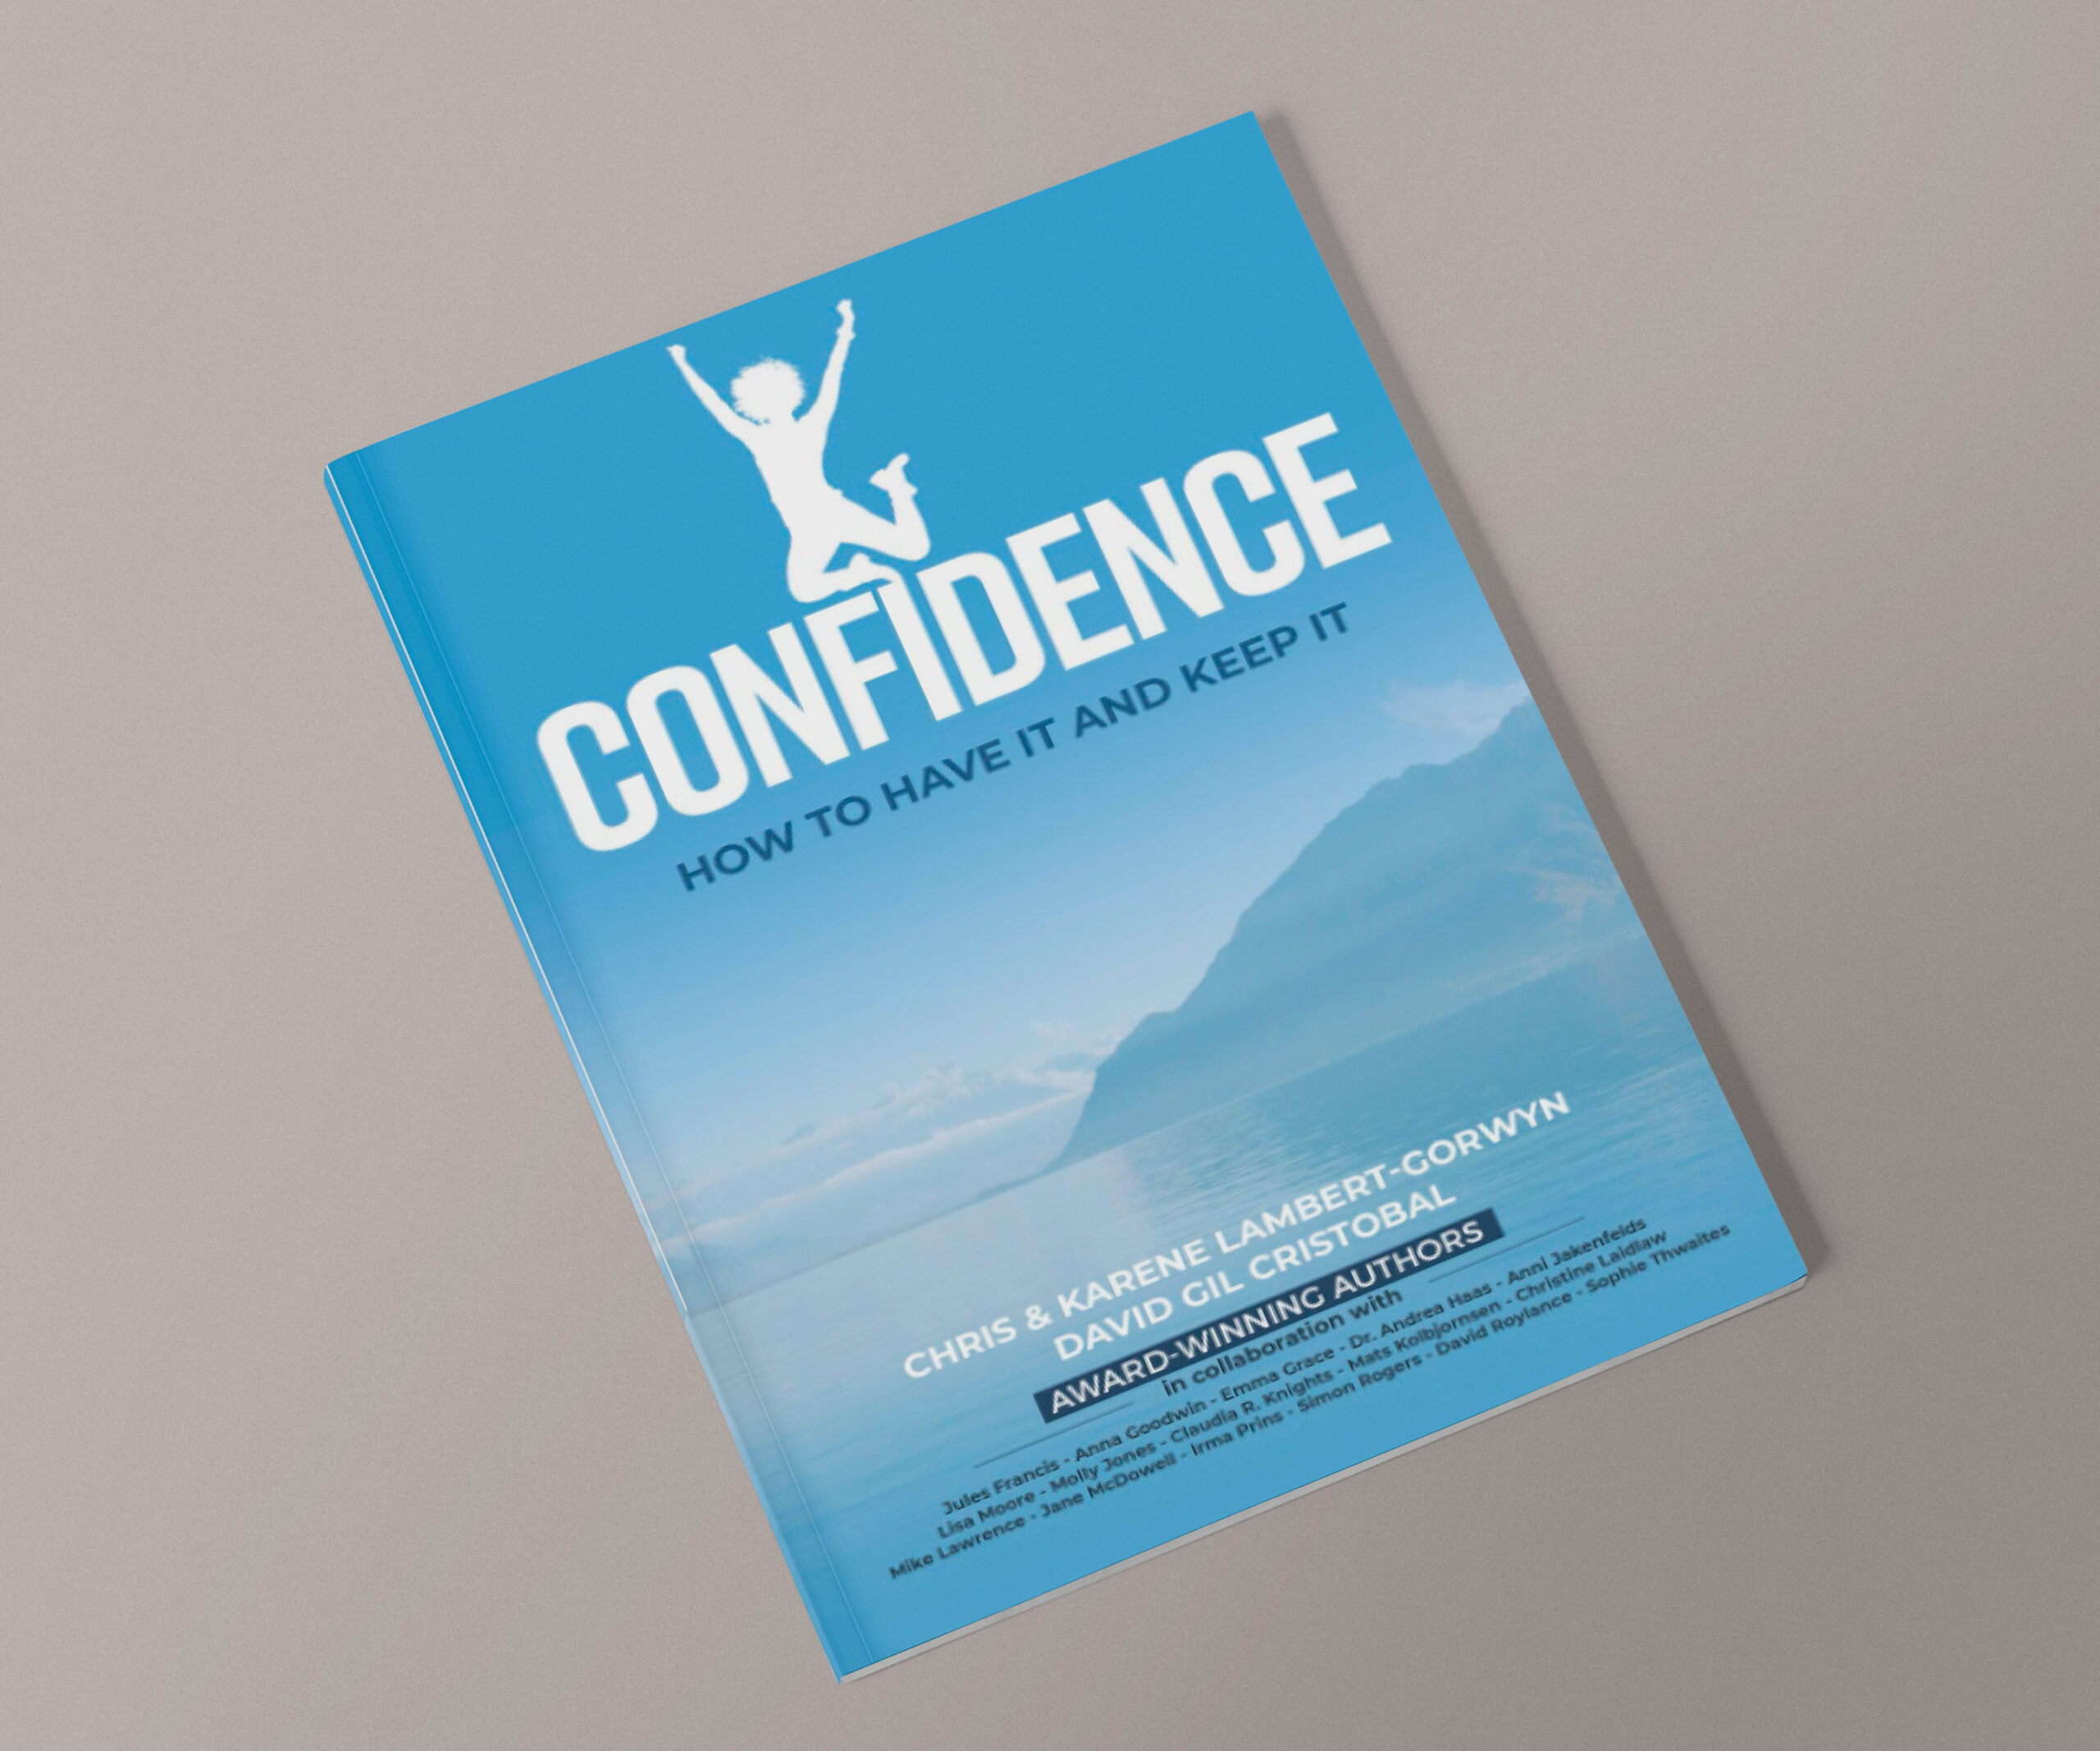 Mike Lawrence – Confidence: How To Have It And Keep It